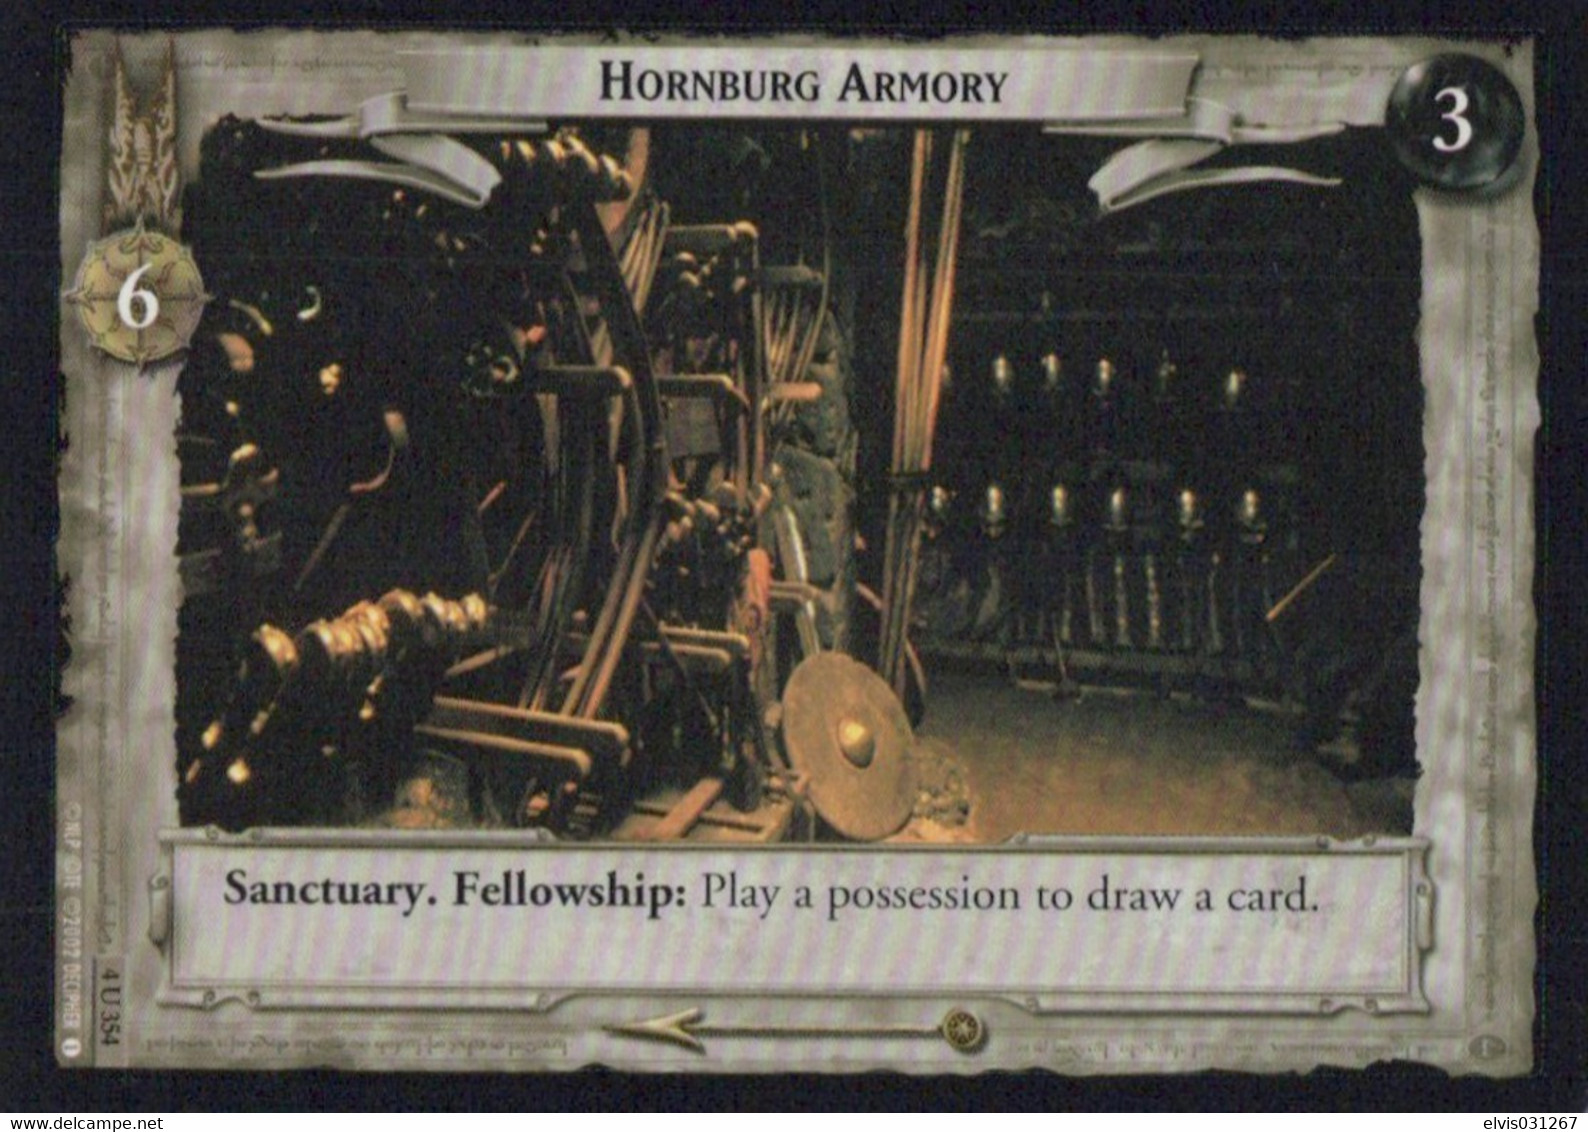 Vintage The Lord Of The Rings: #3-6 Hornburg Armory - EN - 2001-2004 - Mint Condition - Trading Card Game - Lord Of The Rings